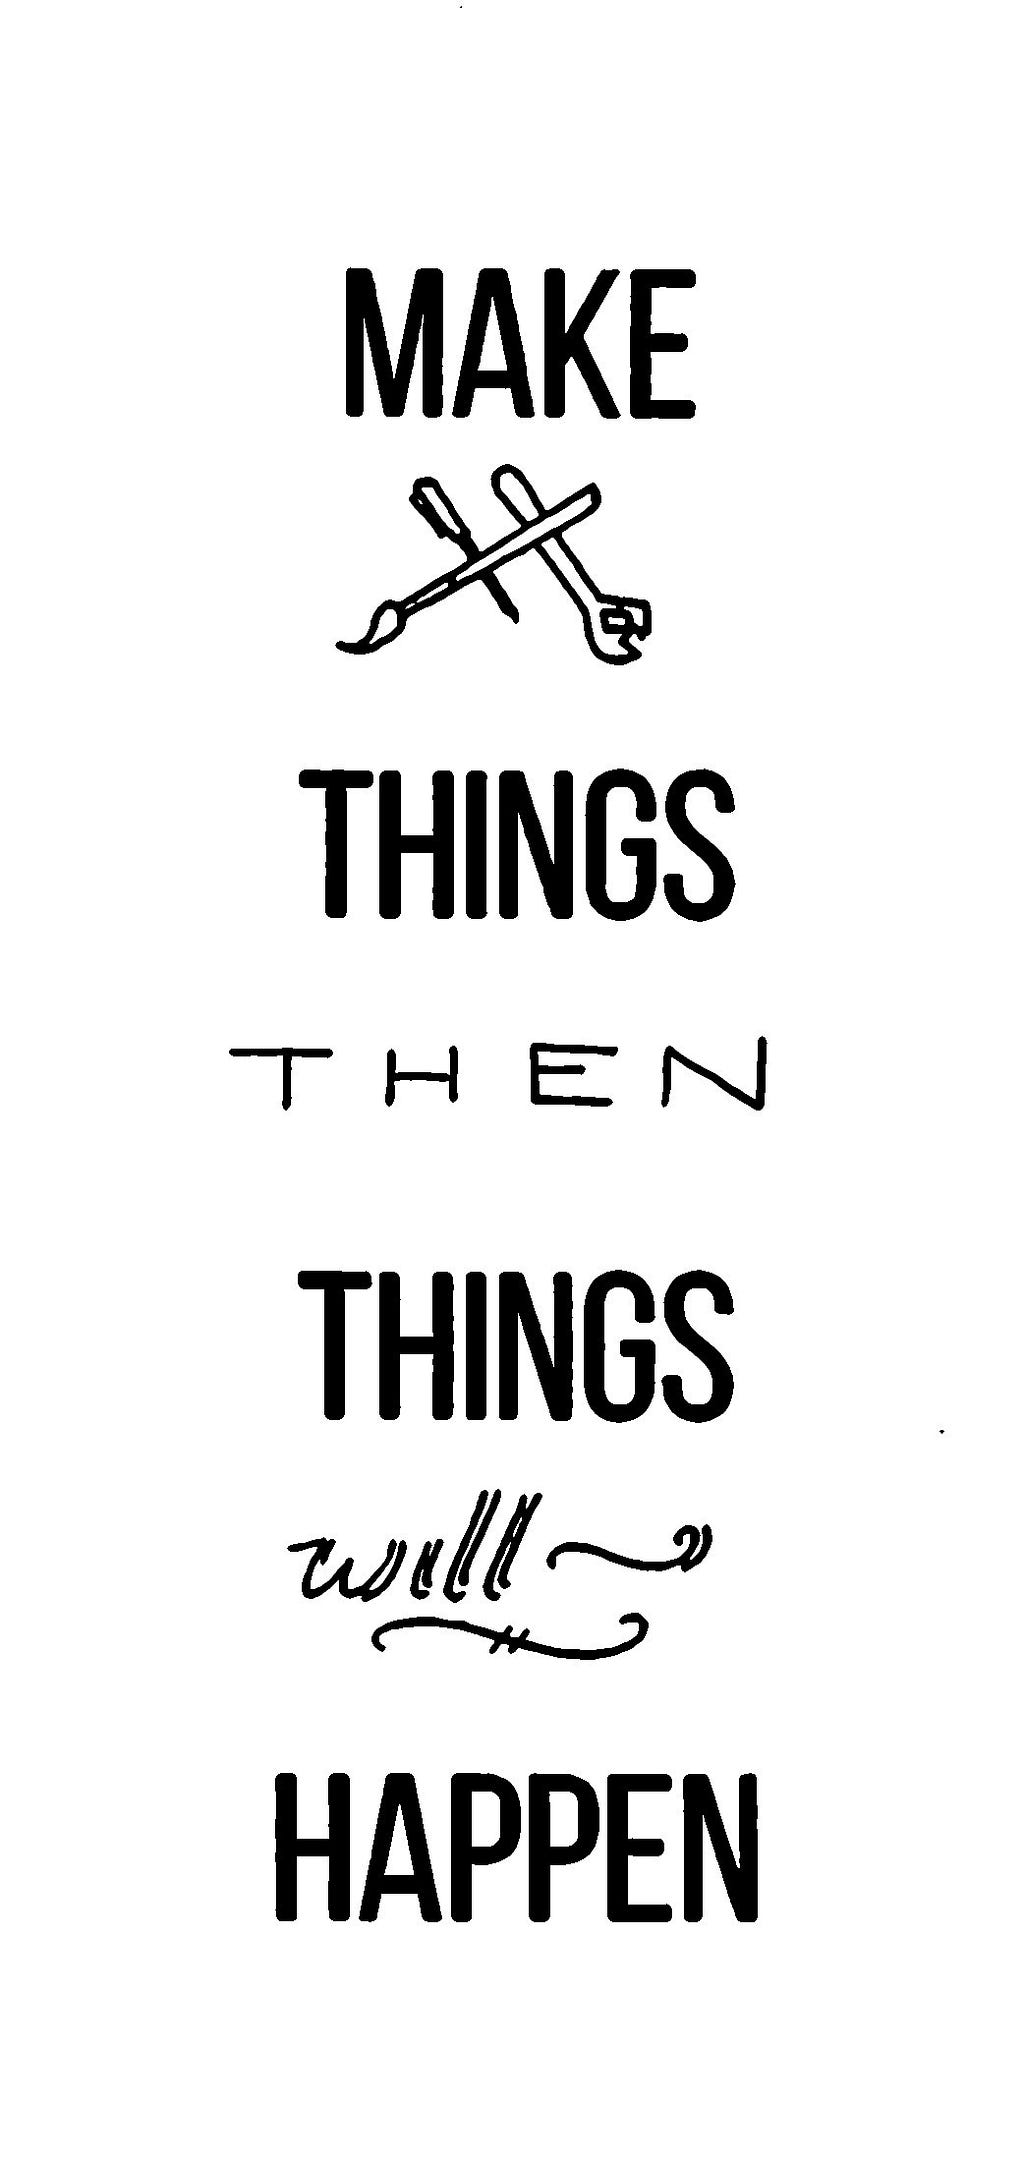 Image says “Make Things, Then Things Will Happen”